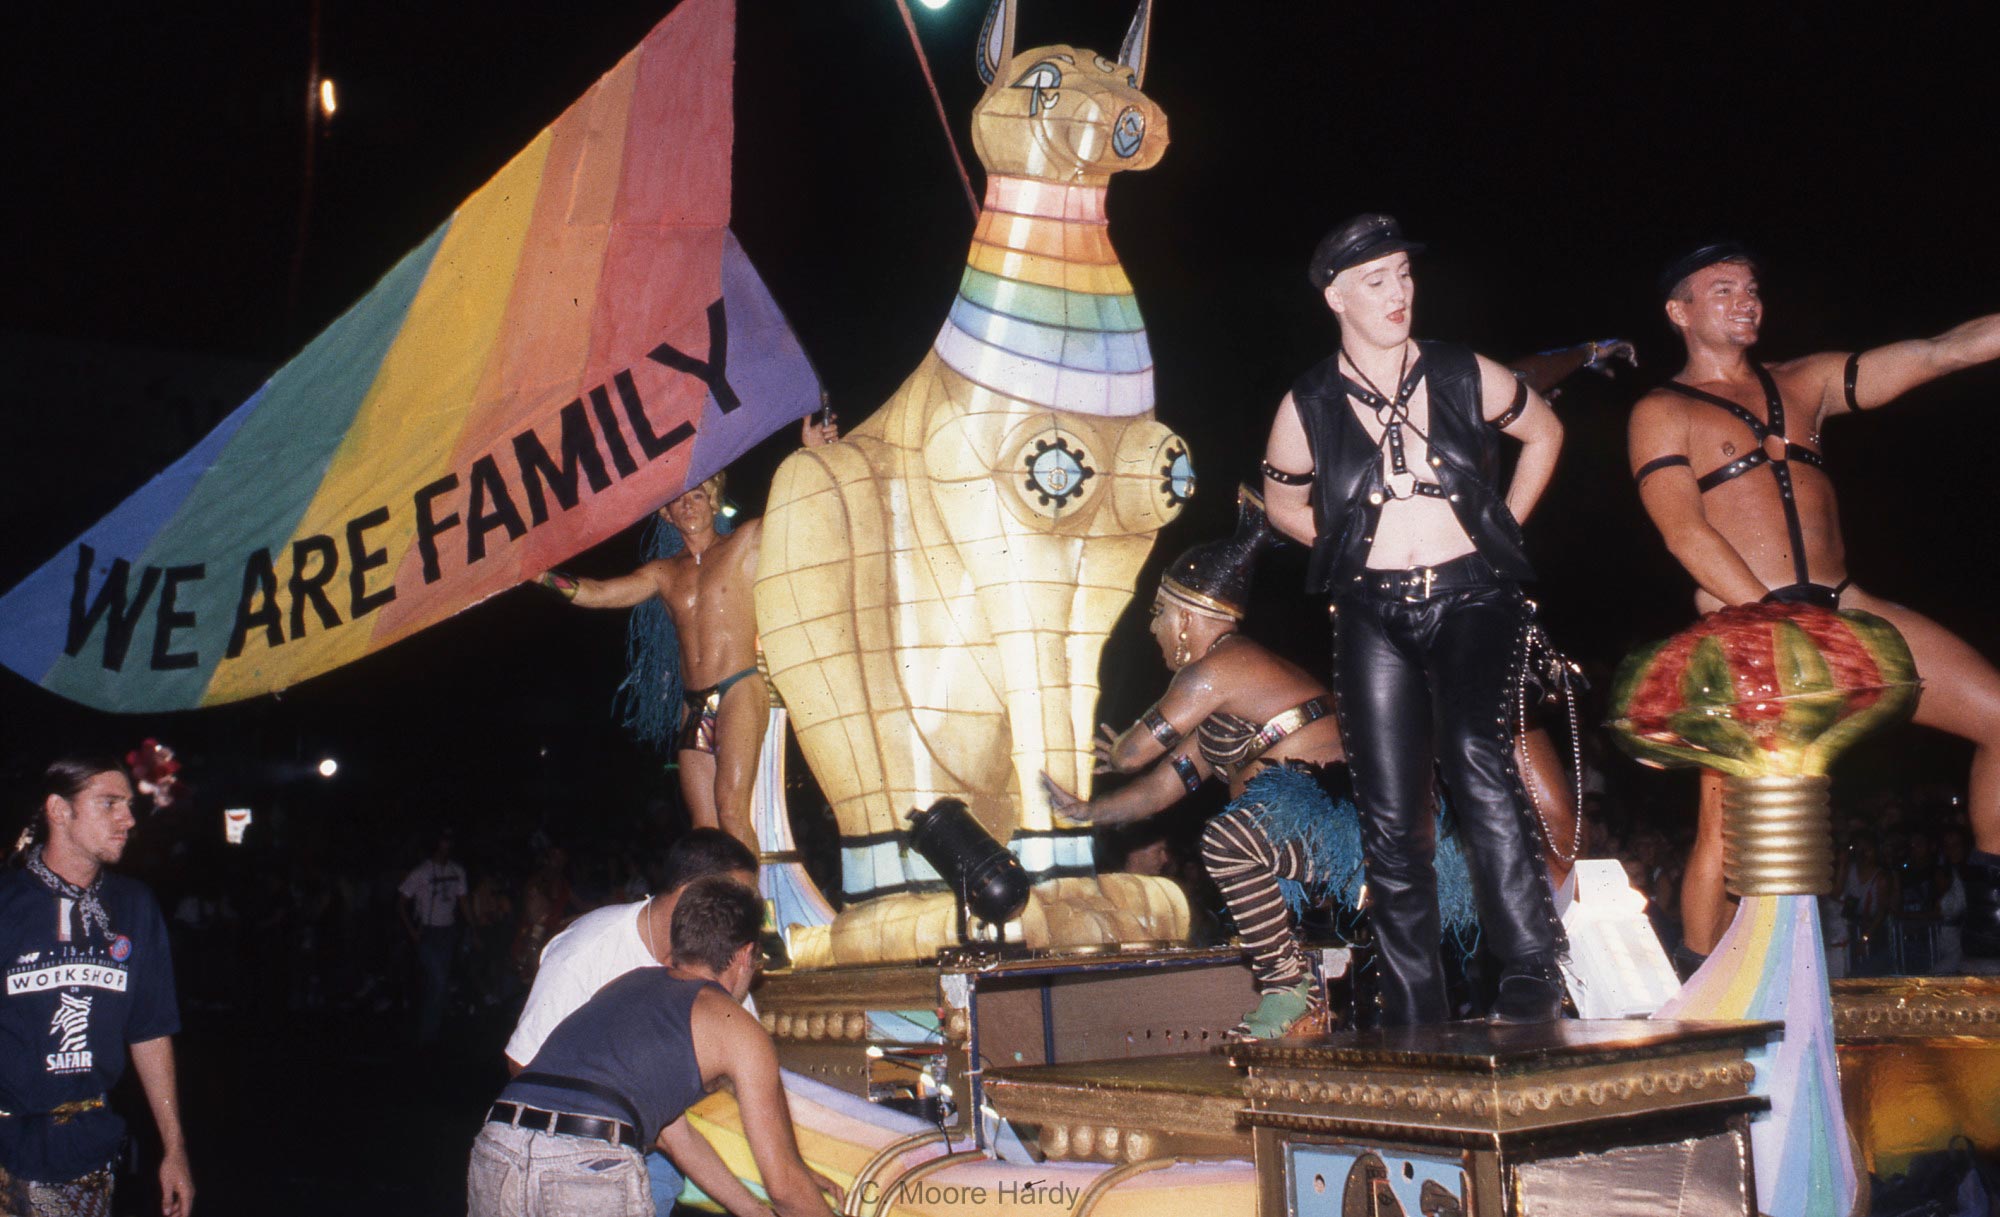 Lead float in the Sydney Gay and Lesbian Mardi Gras Parade, 1992.